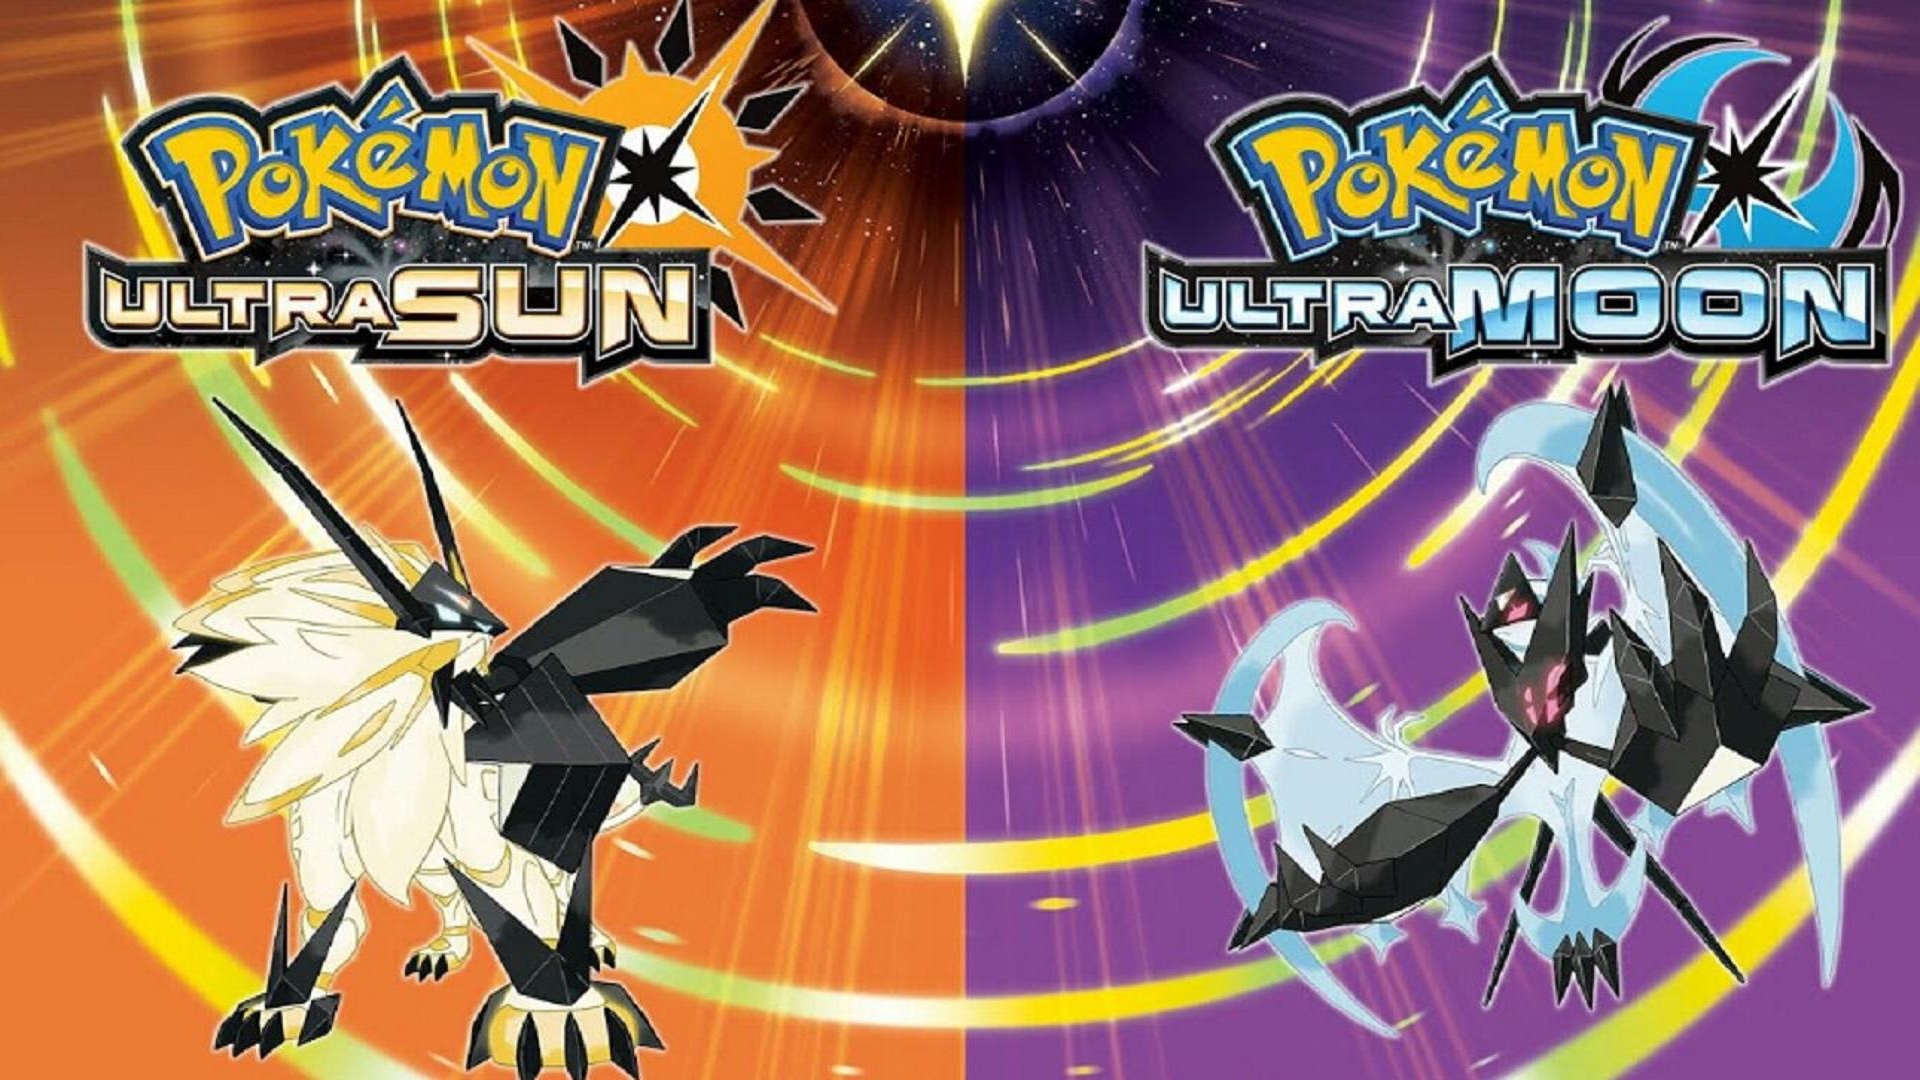 Pokemon Ultra Sun and Ultra Moon Game Download, Leaks, Pokemon, Pokedex,  Walkthrough, Exclusives, Guide Unofficial on Apple Books